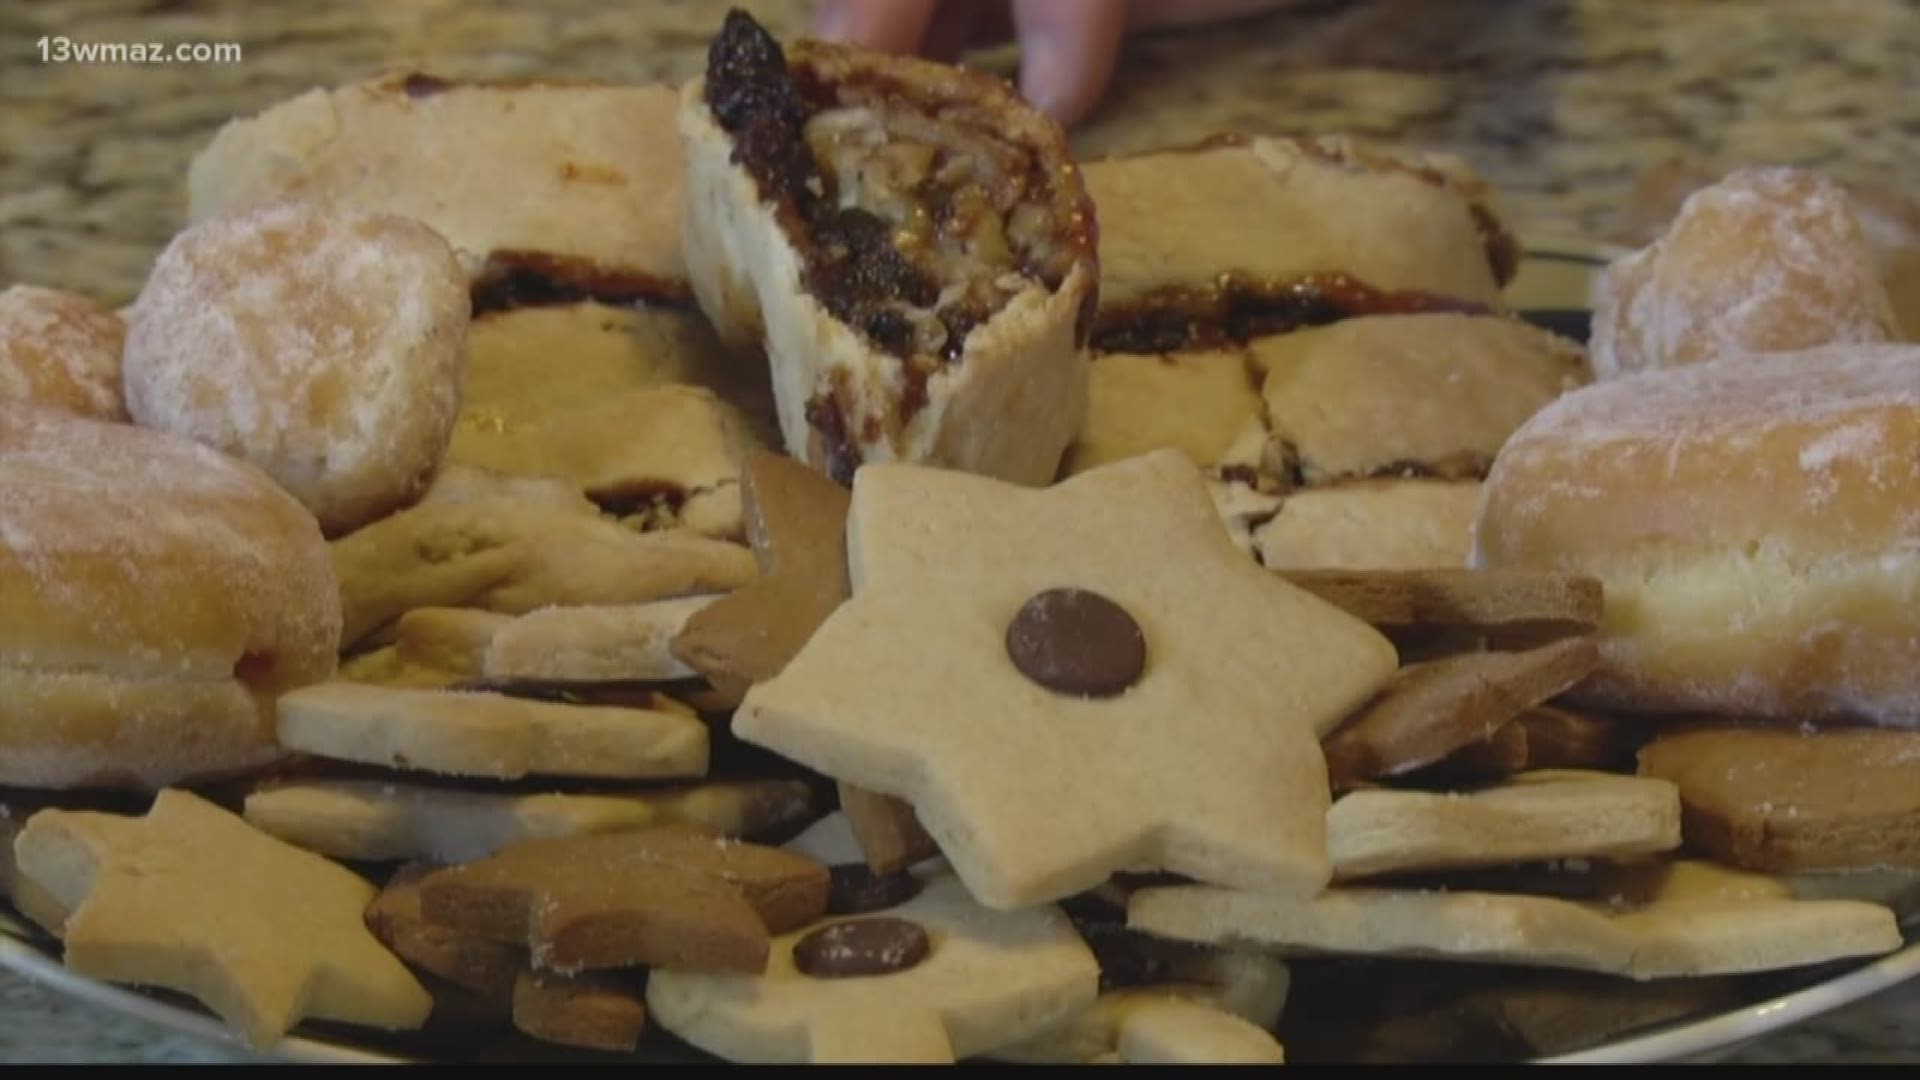 Holiday Foods from the Homeland: The sweeter side of Hanukkah